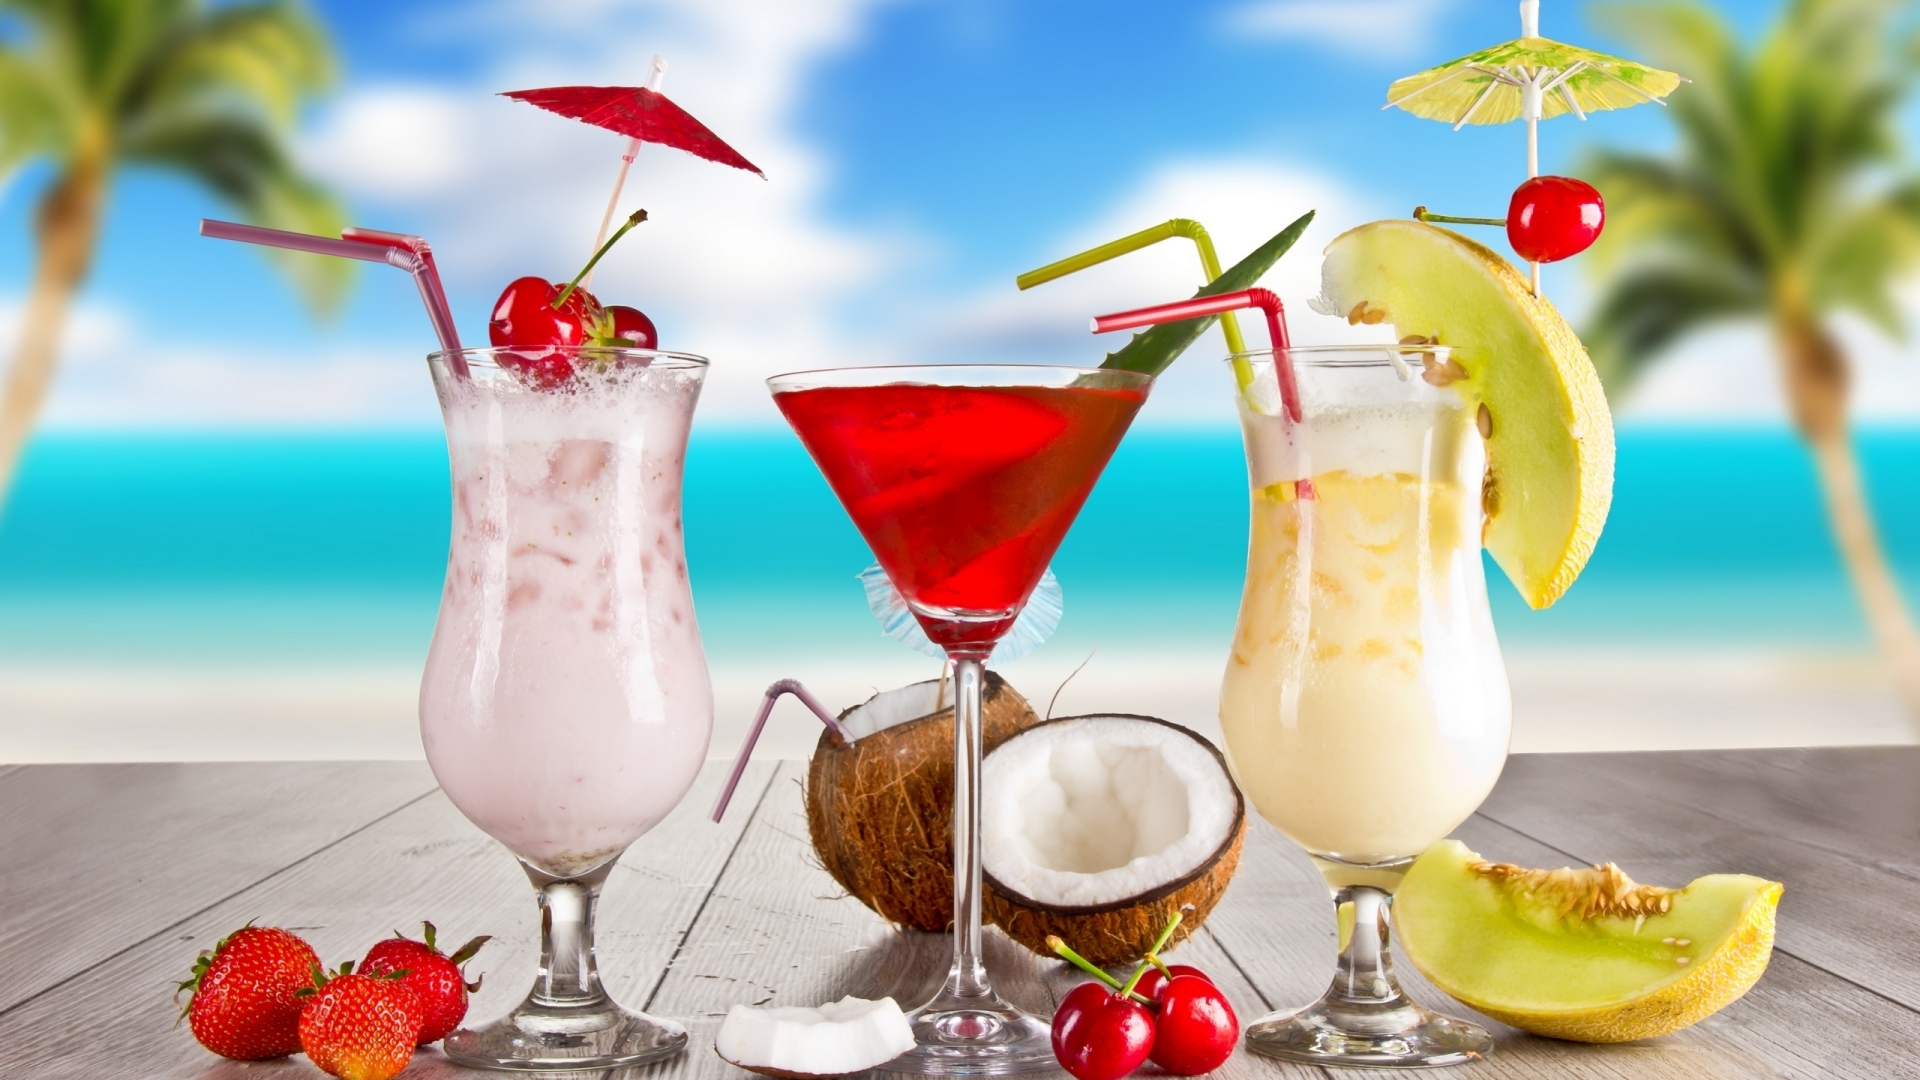 Exotic Summer Cocktails for 1920 x 1080 HDTV 1080p resolution